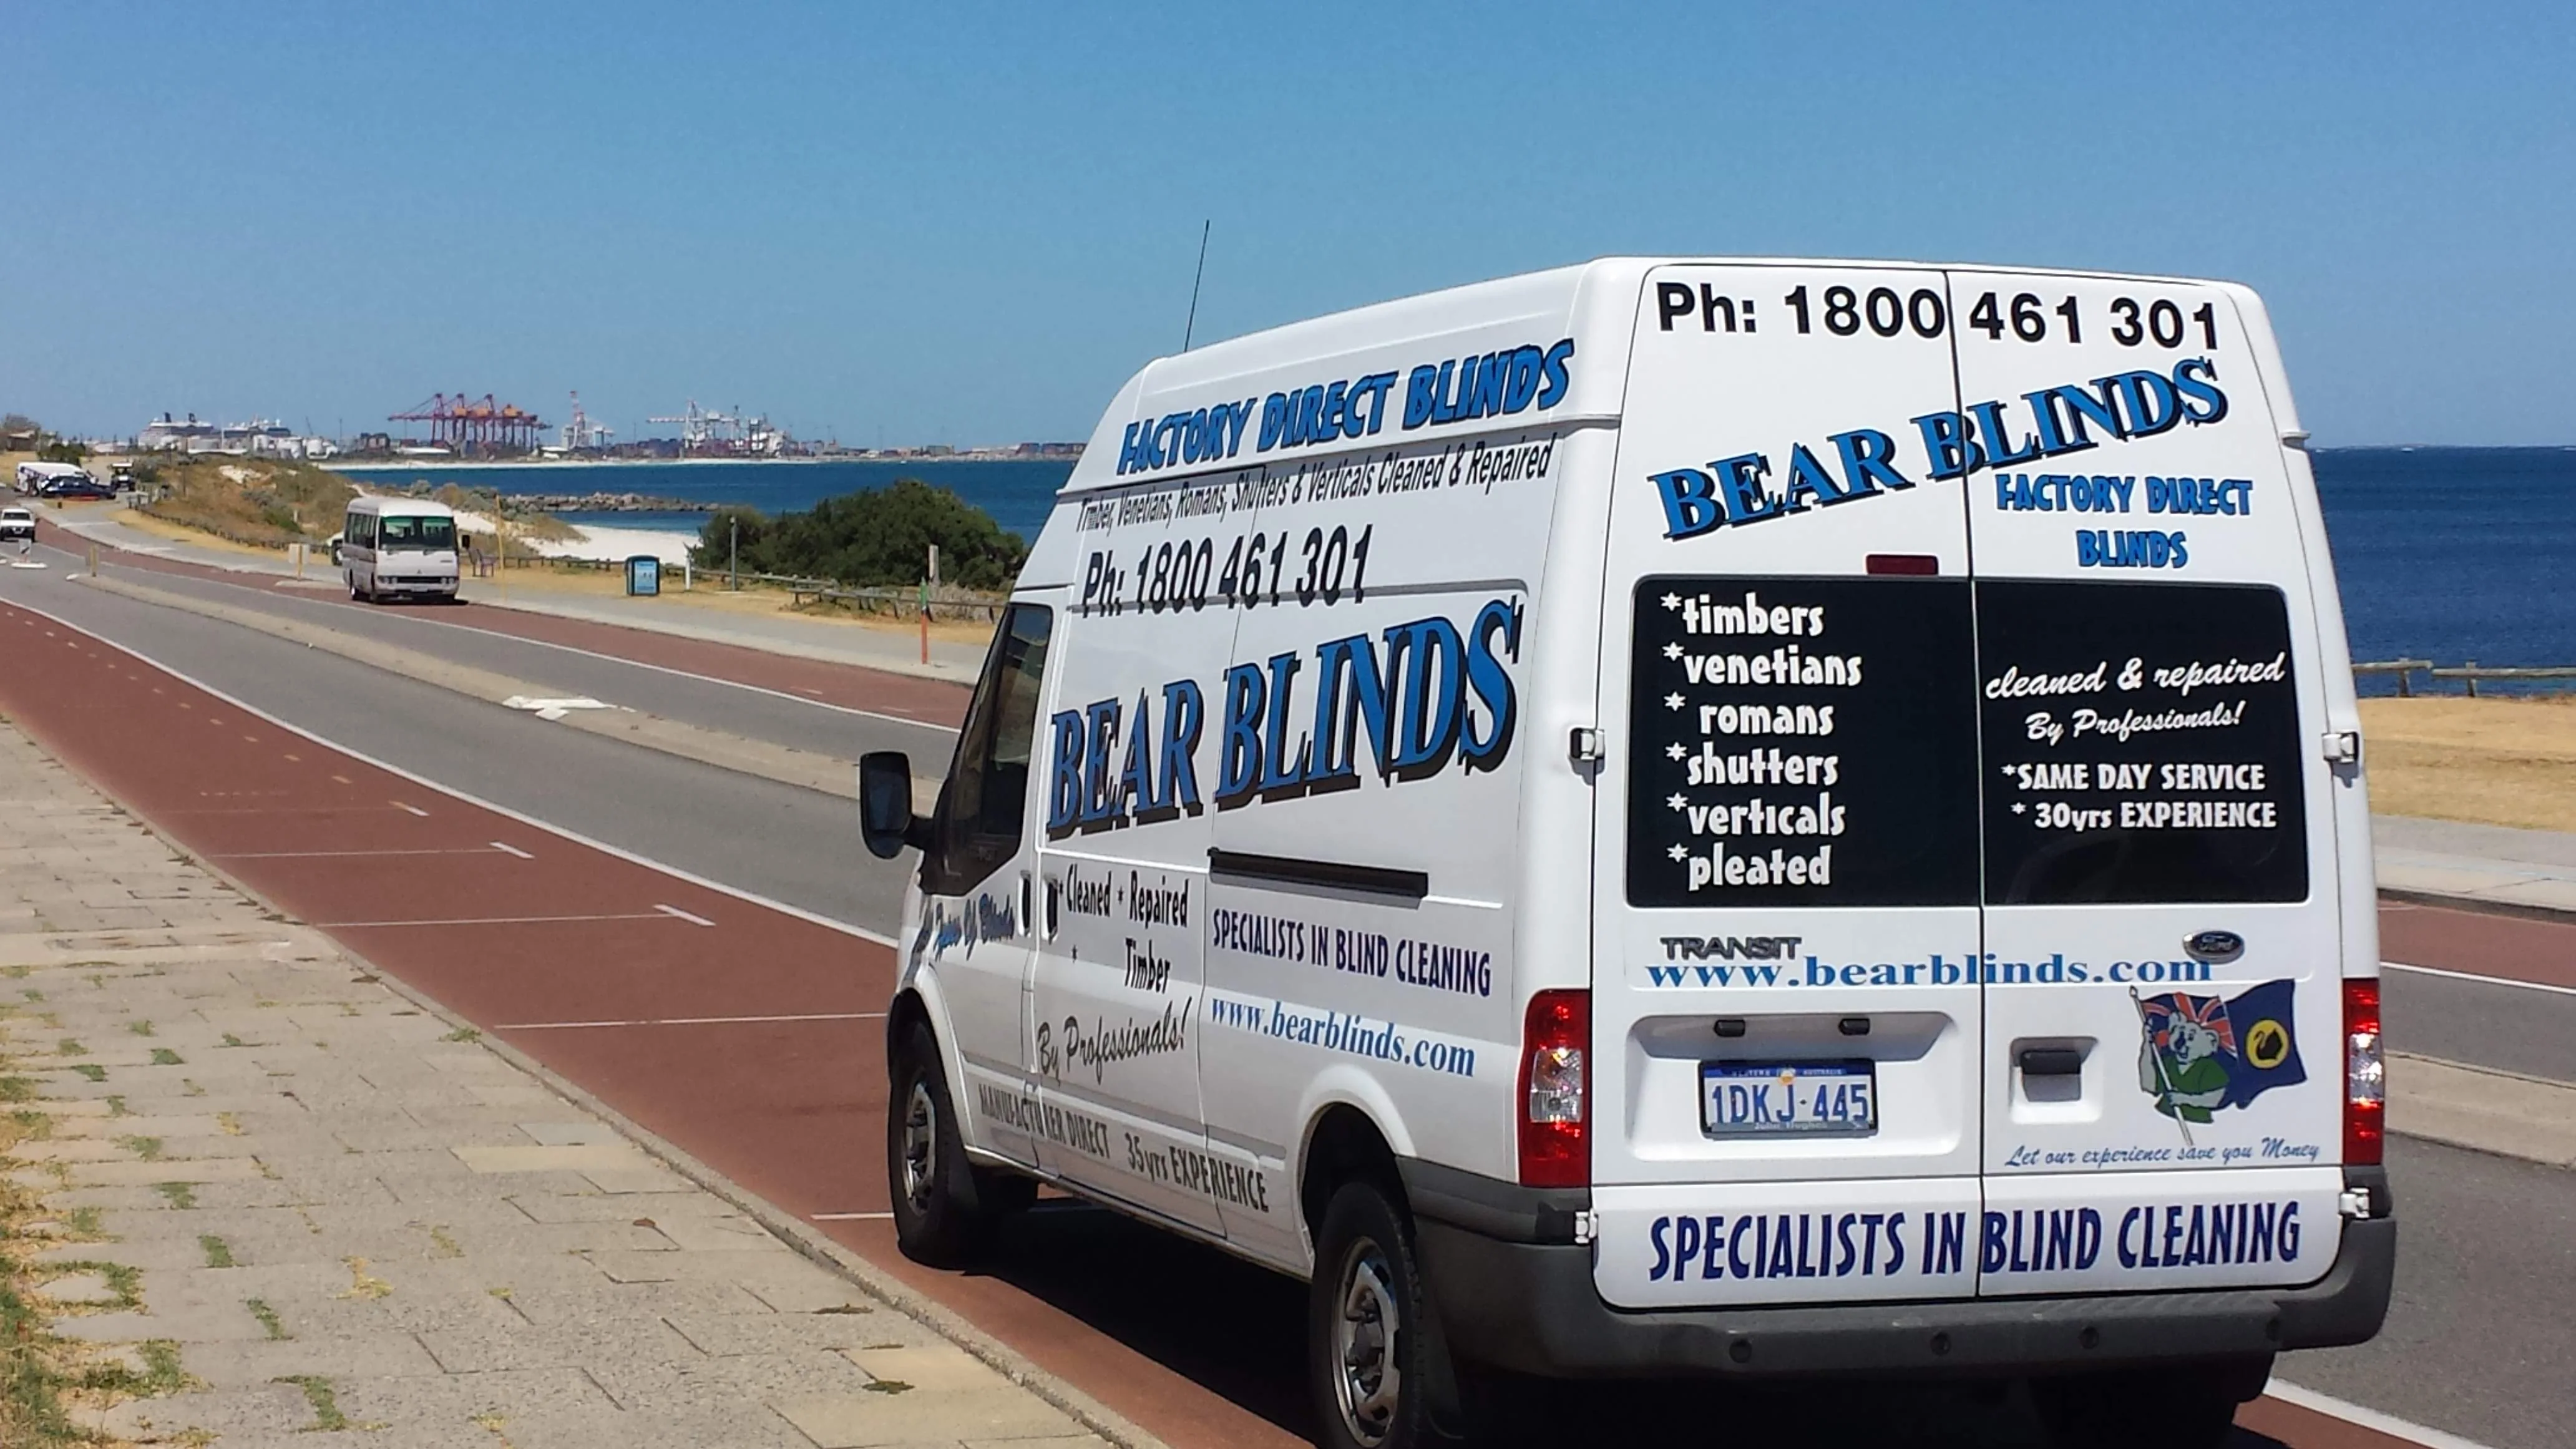 bear blind repairs blind cleaning perth professional bear blind repairs blind cleaning perth professional subiaco nedlands blind cleaning repair professionals